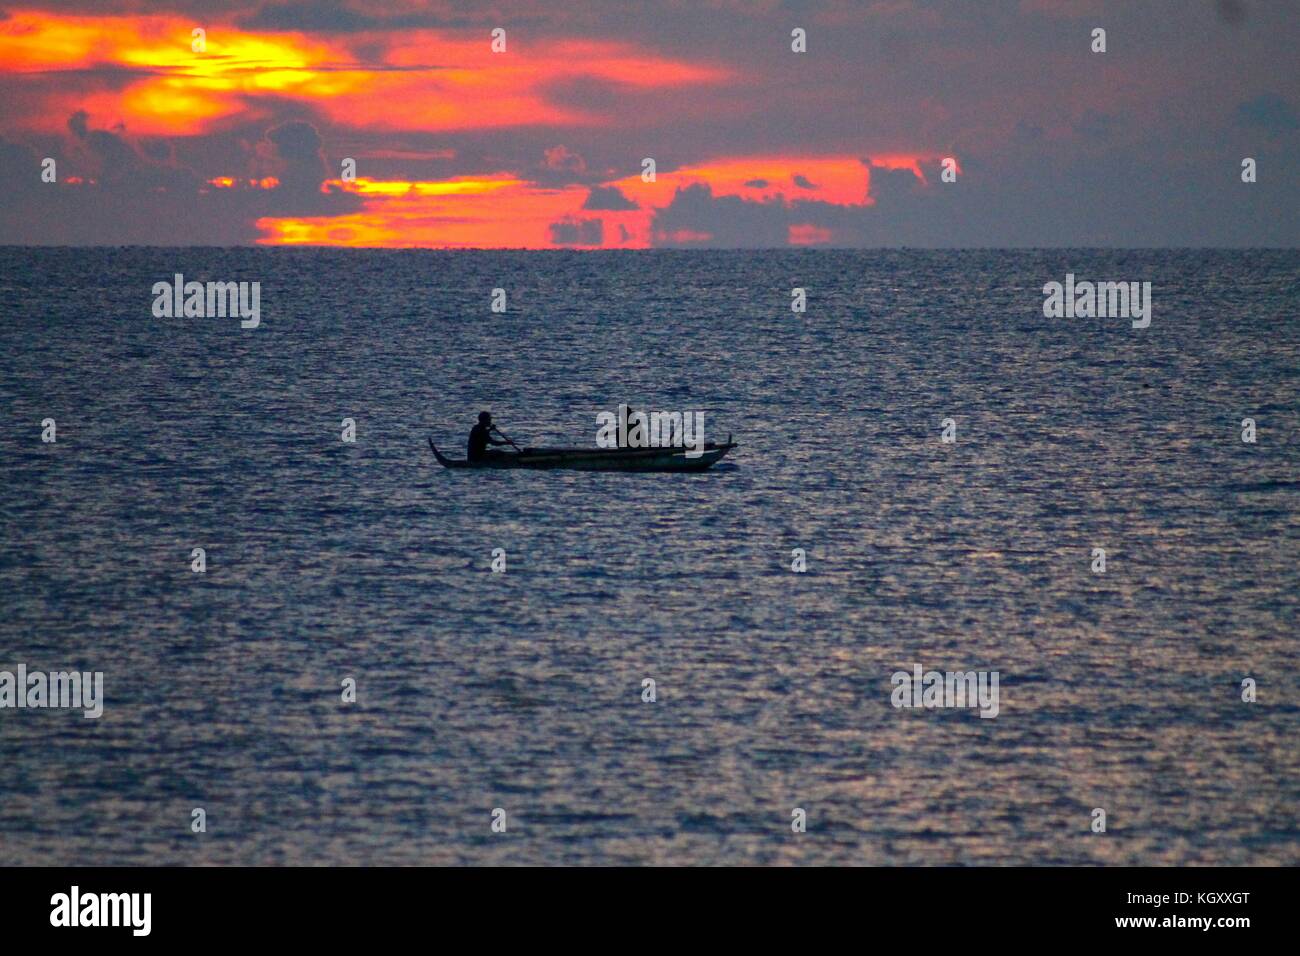 Silhouette of a fisherman in a boat off the coast of Siquijor Island Philippines Stock Photo